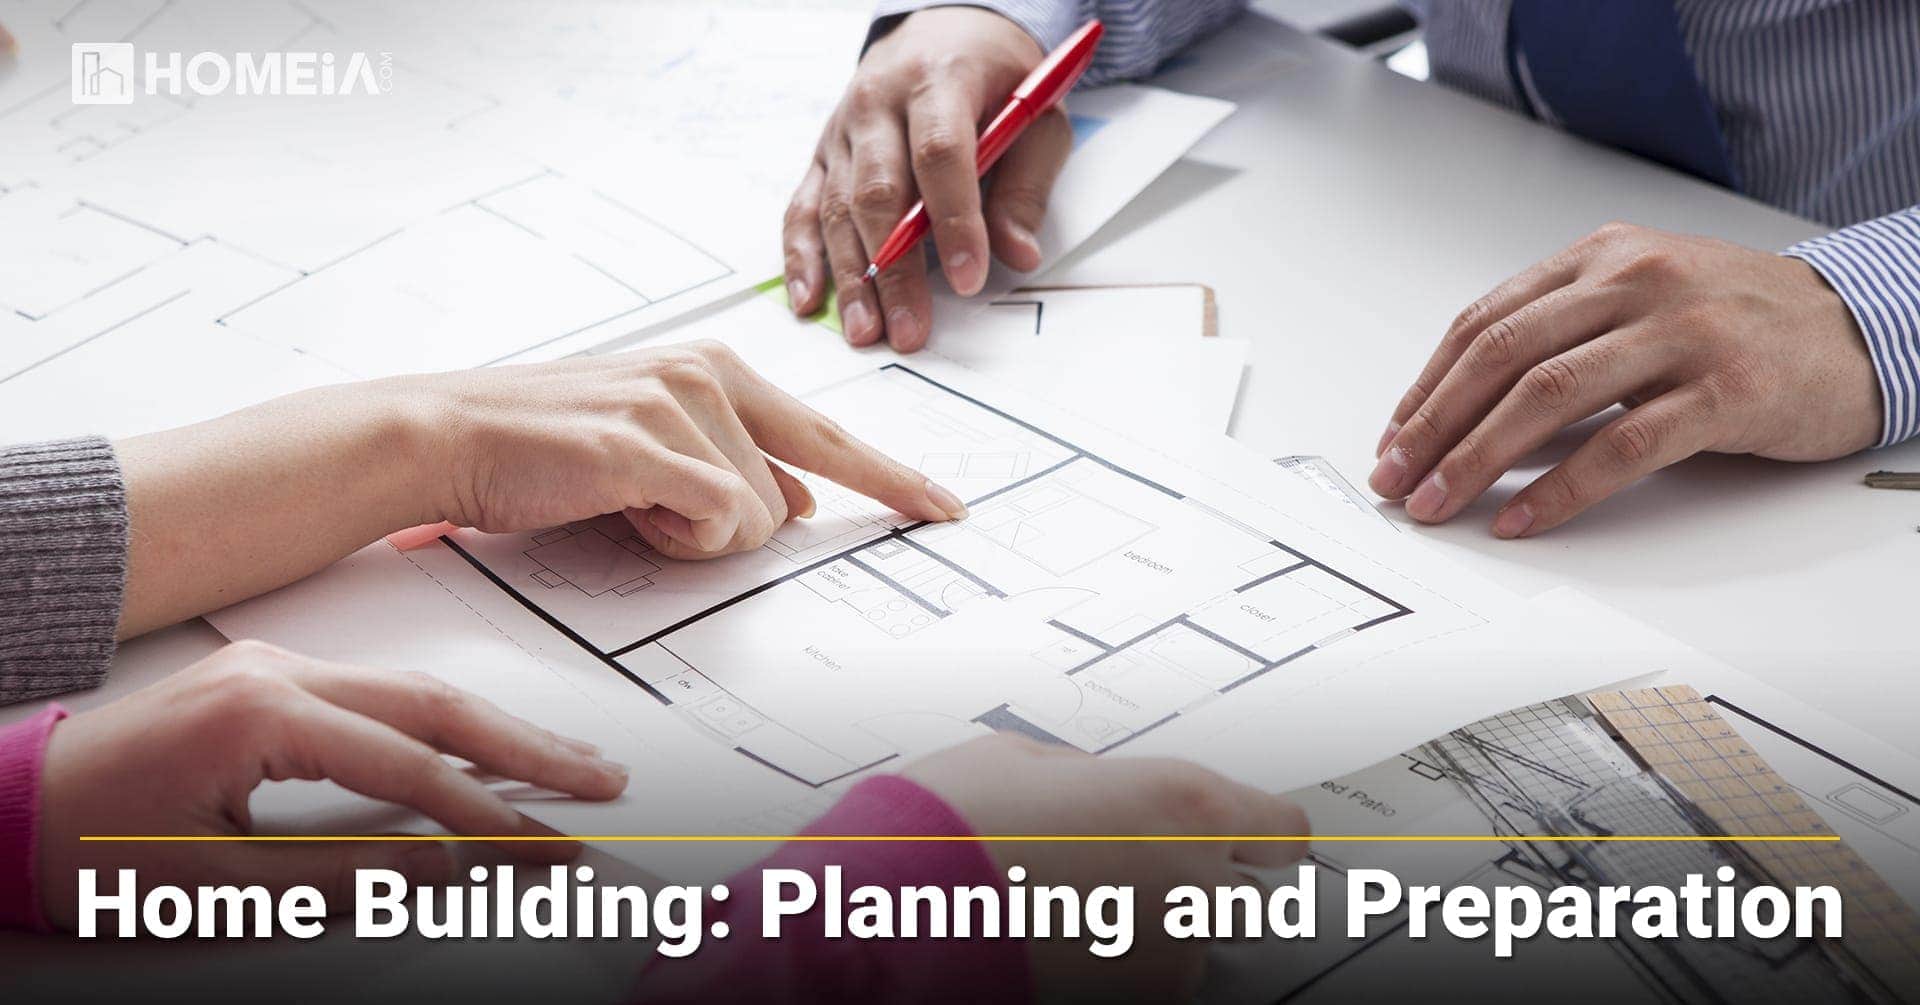 Home Building: Planning and Preparation